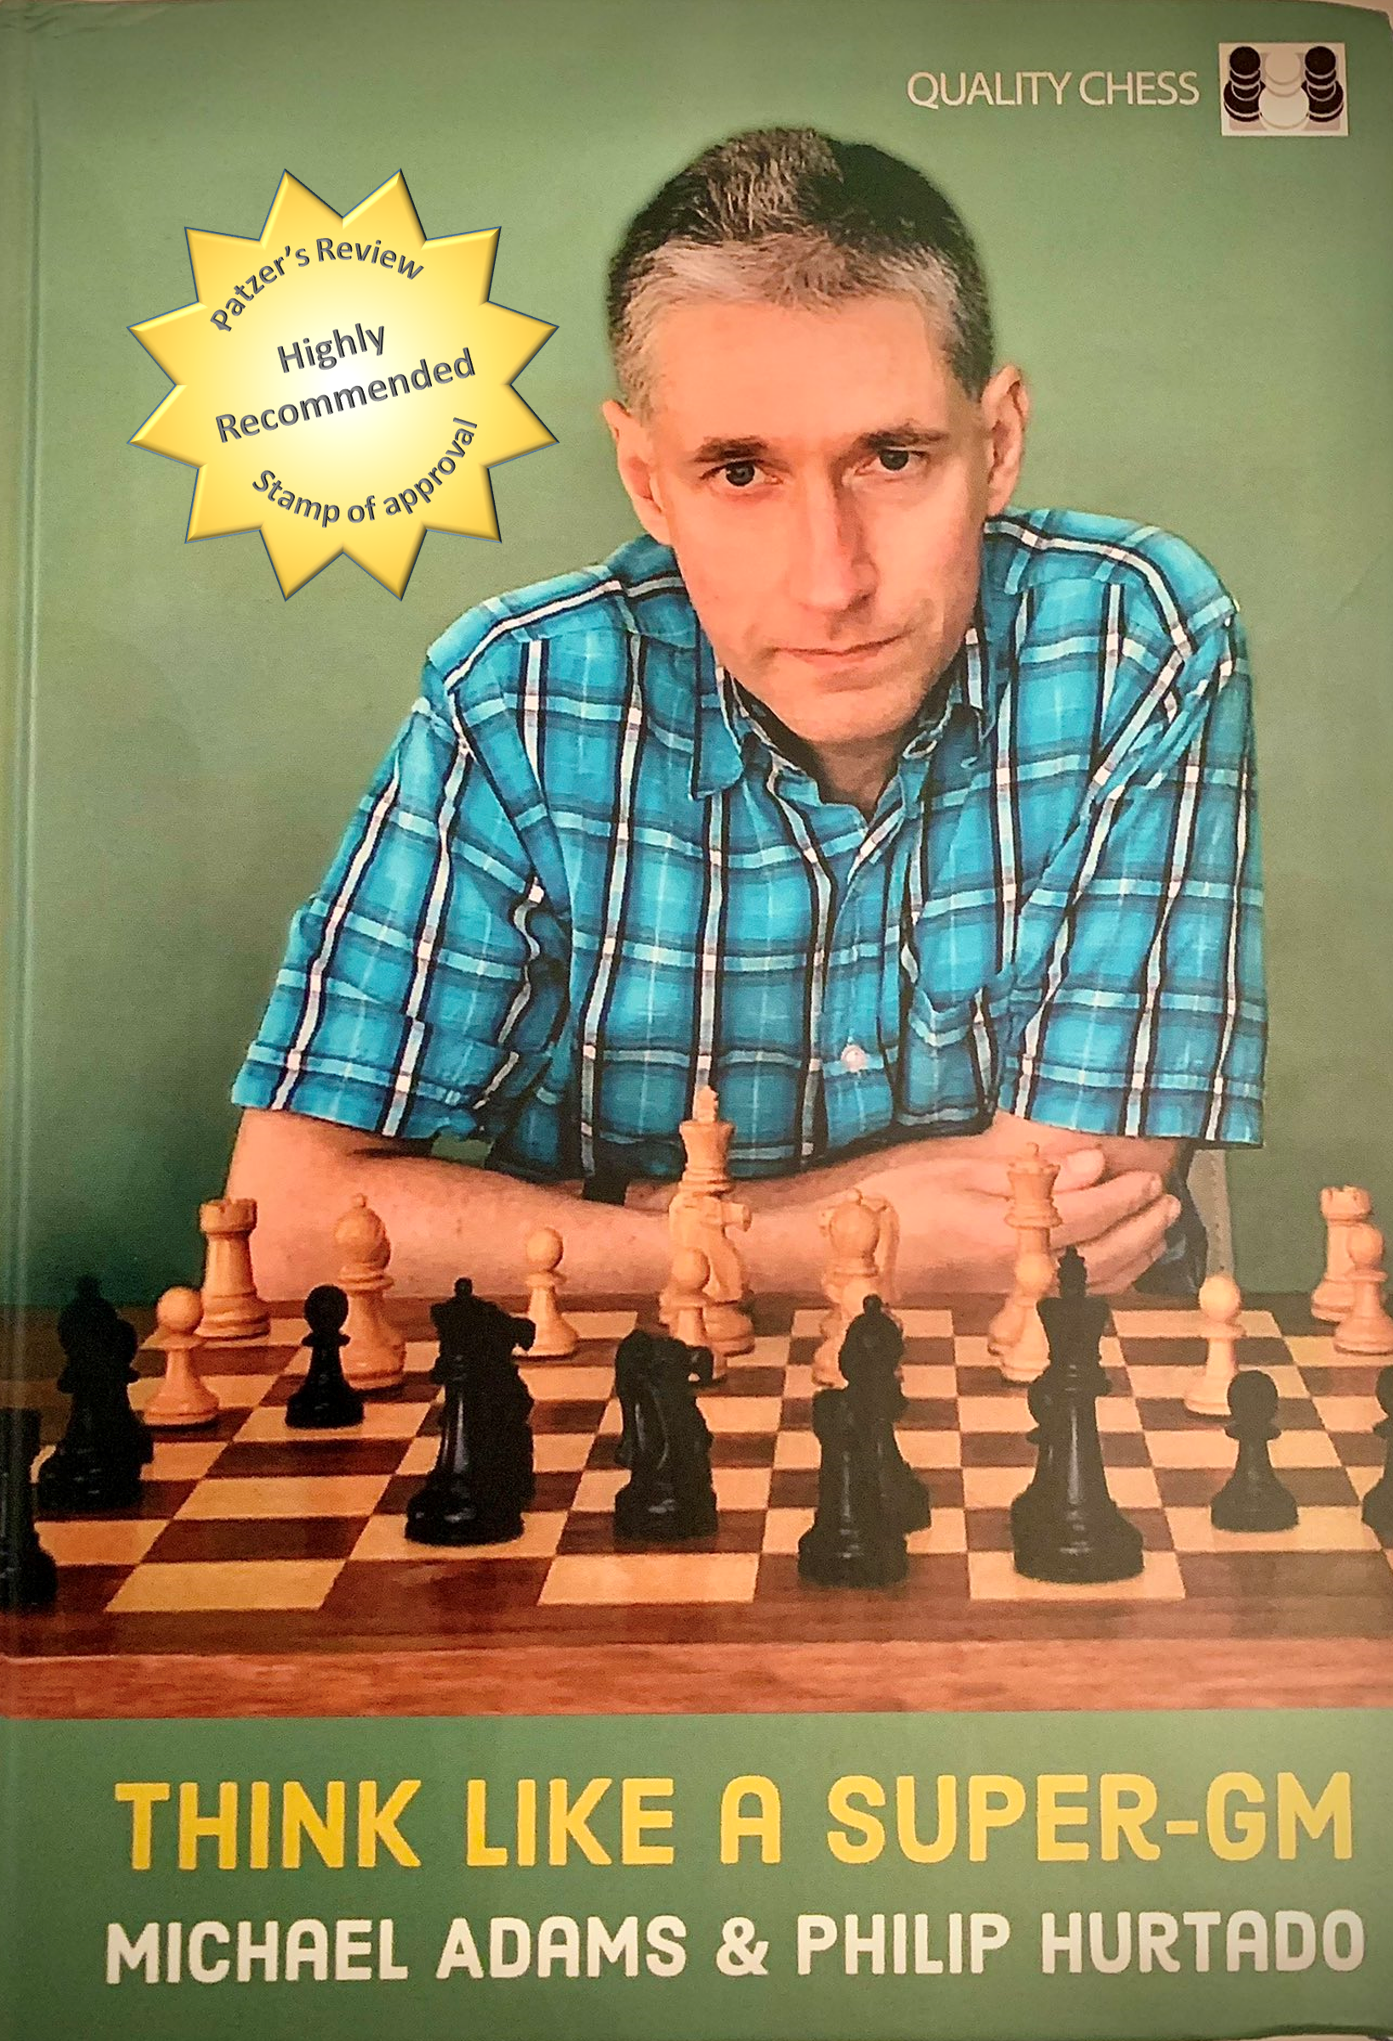 How To Analyze Your Own Chess Game: Part 1 - by GM Noël Studer